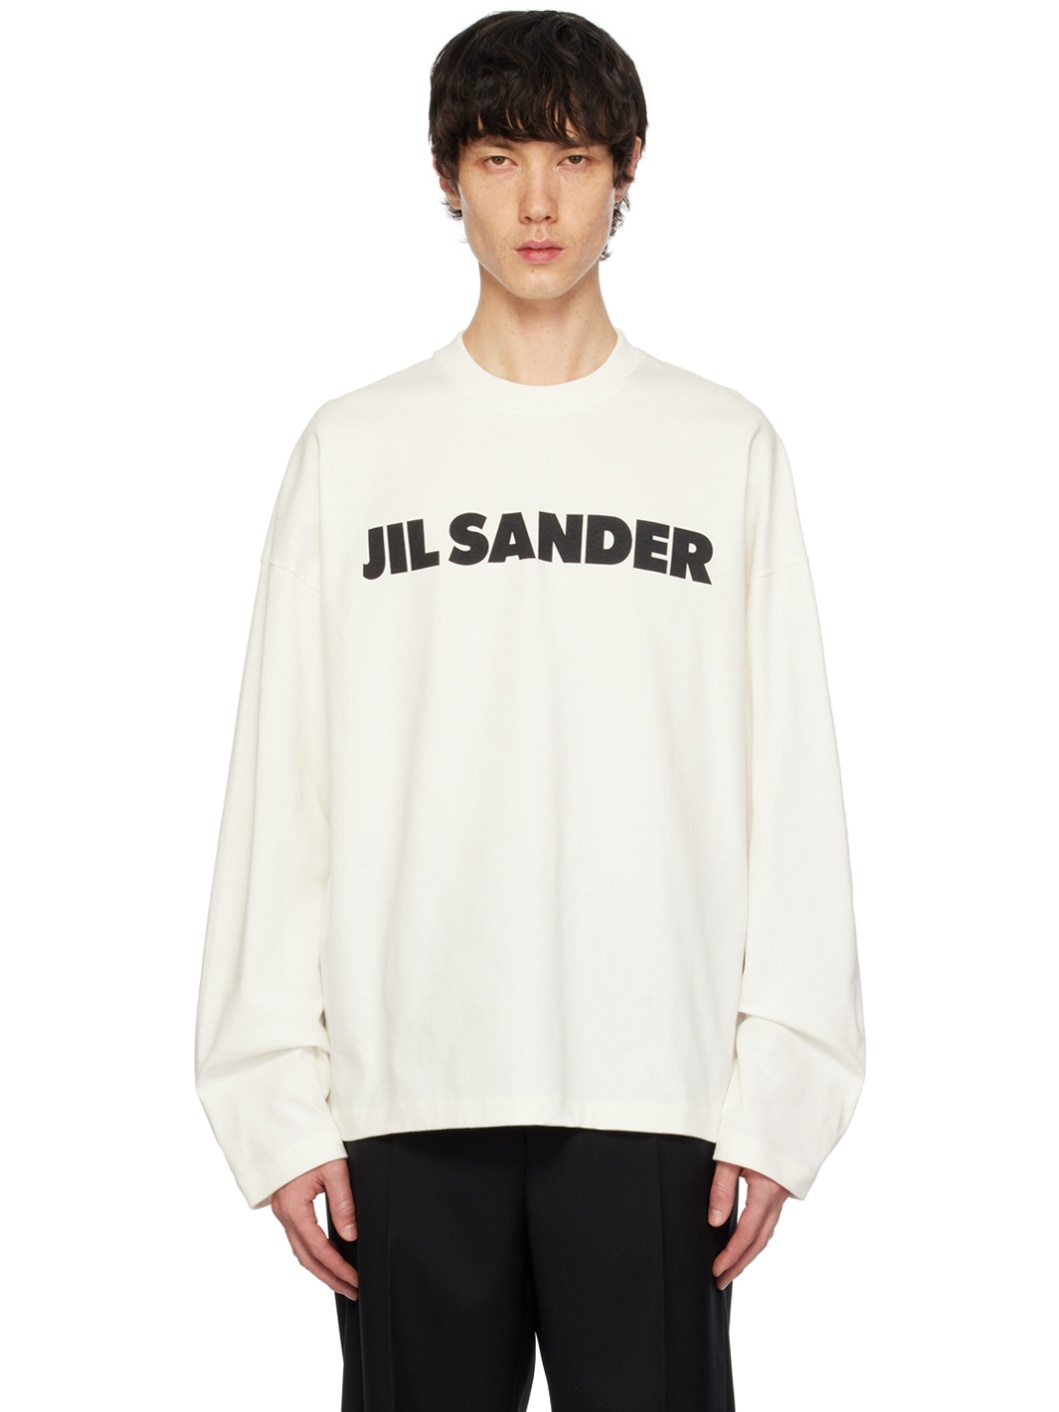 Off-White Printed Long Sleeve T-Shirt - 1